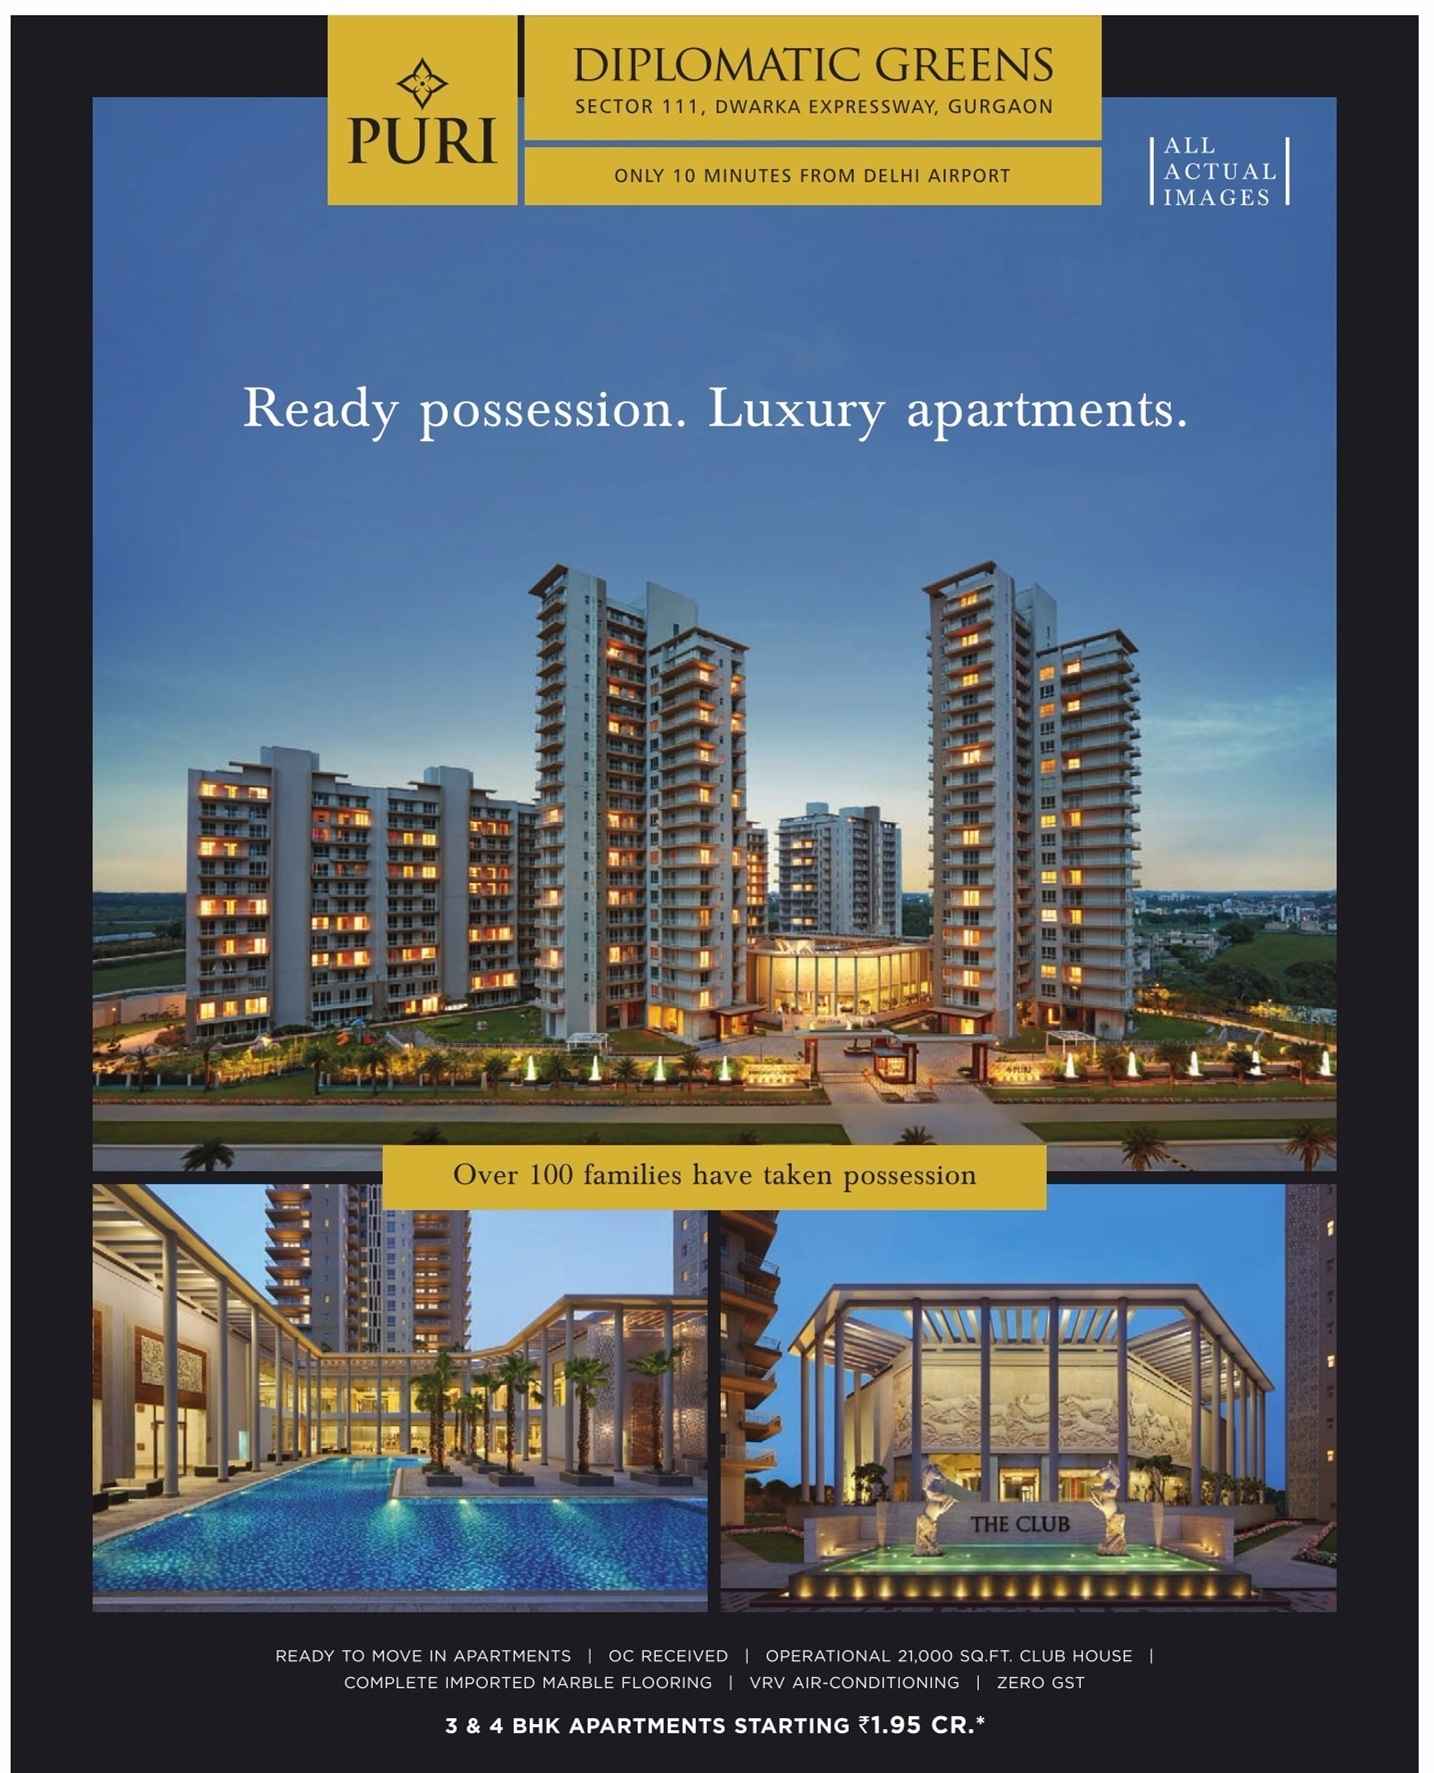 Ready possession luxury apartments at Puri Diplomatic Greens in Gurgaon Update